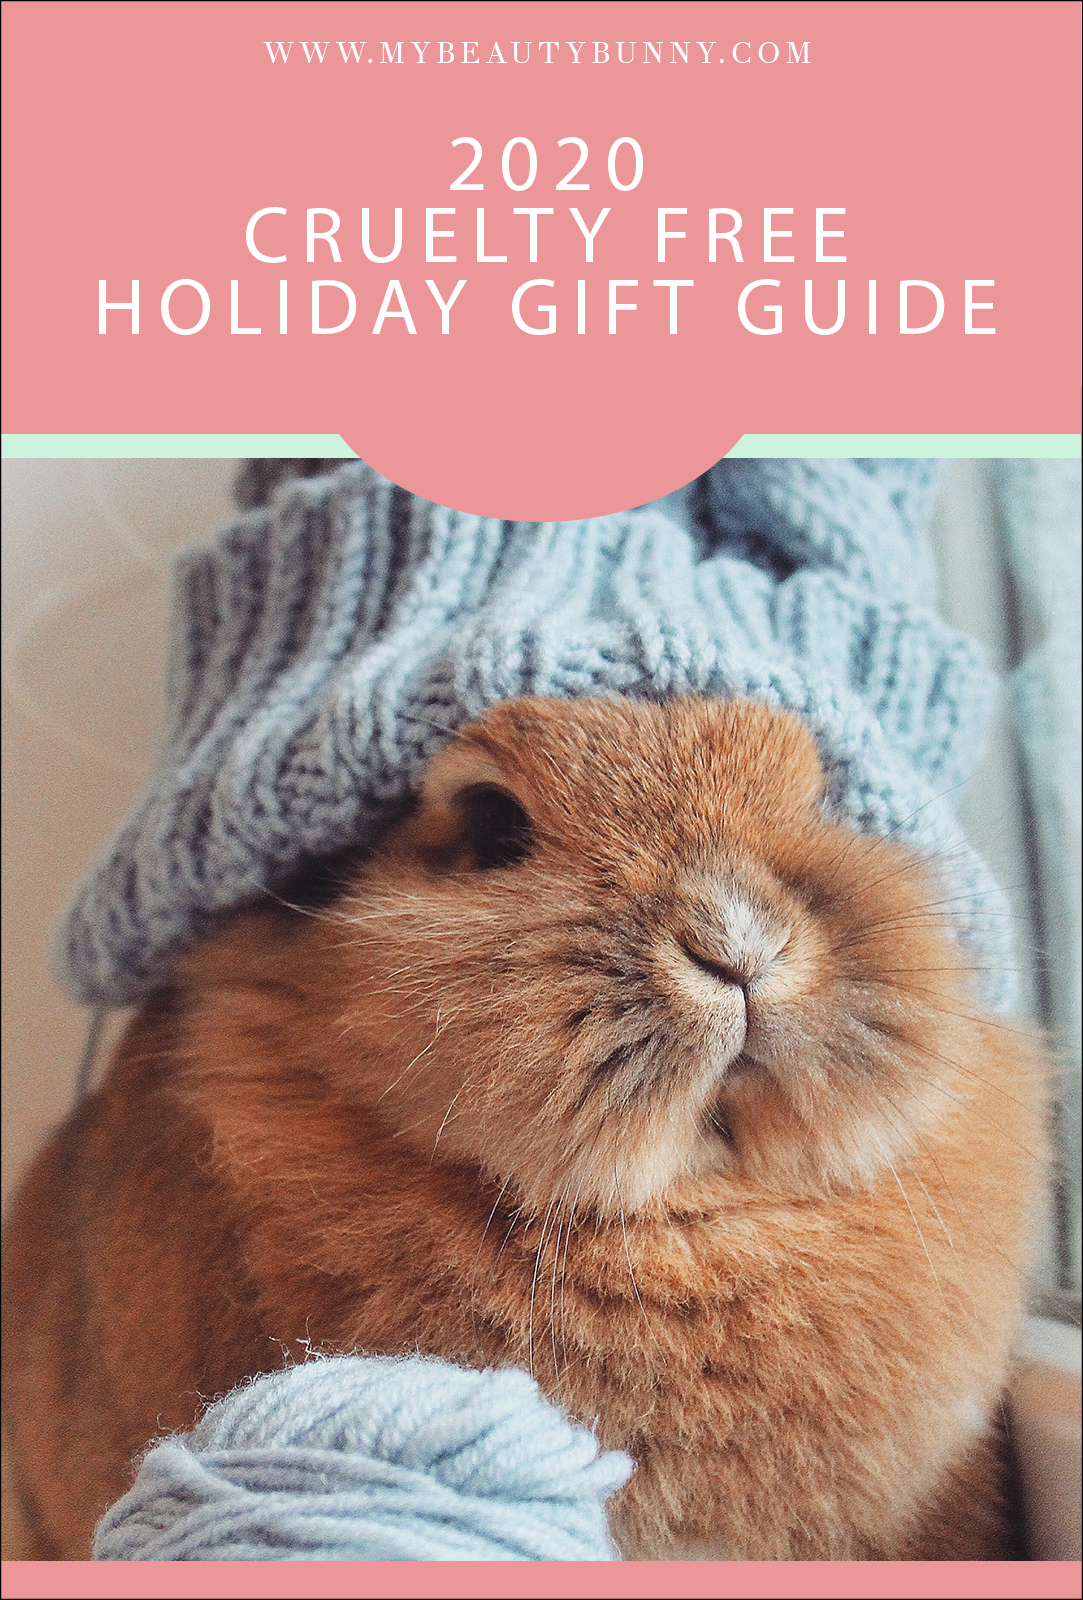 Cruelty Free Holiday Gift Guide 2020